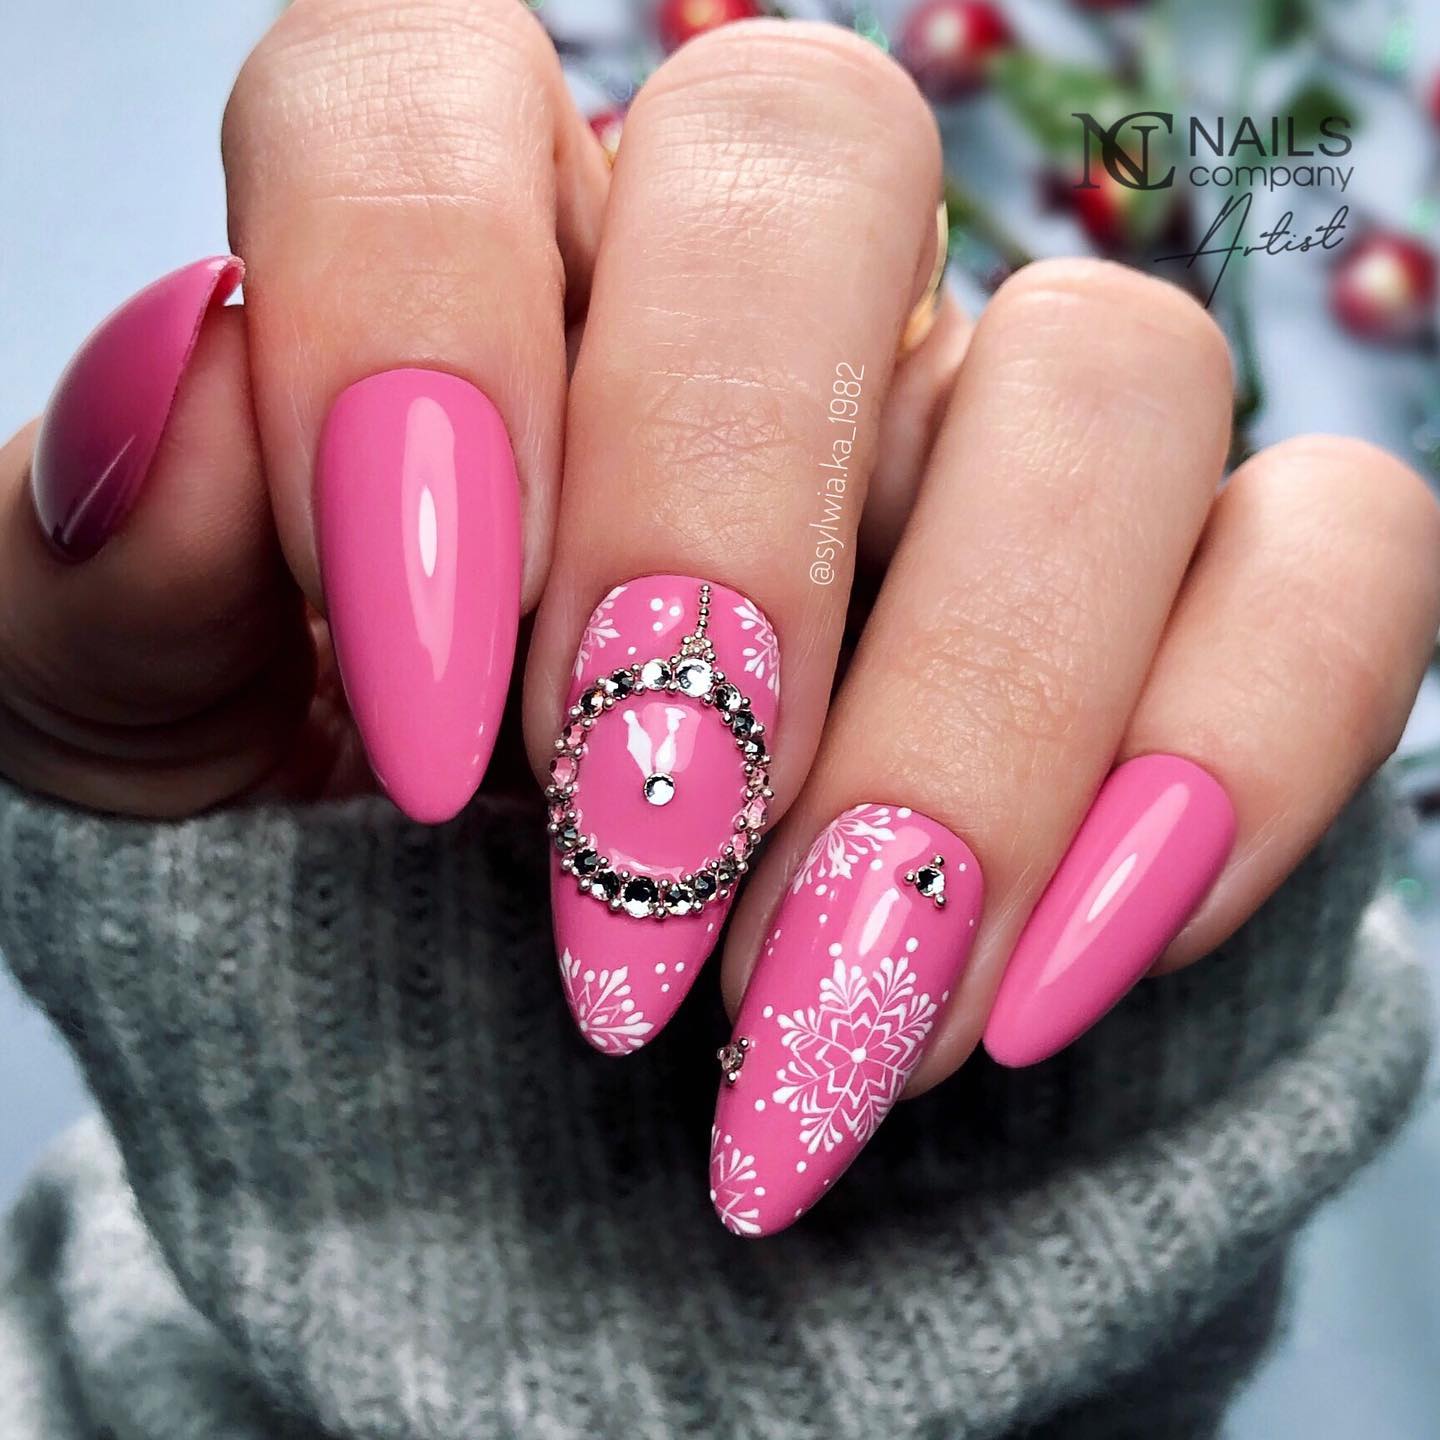 Dark Pink Nails with White Snowflakes